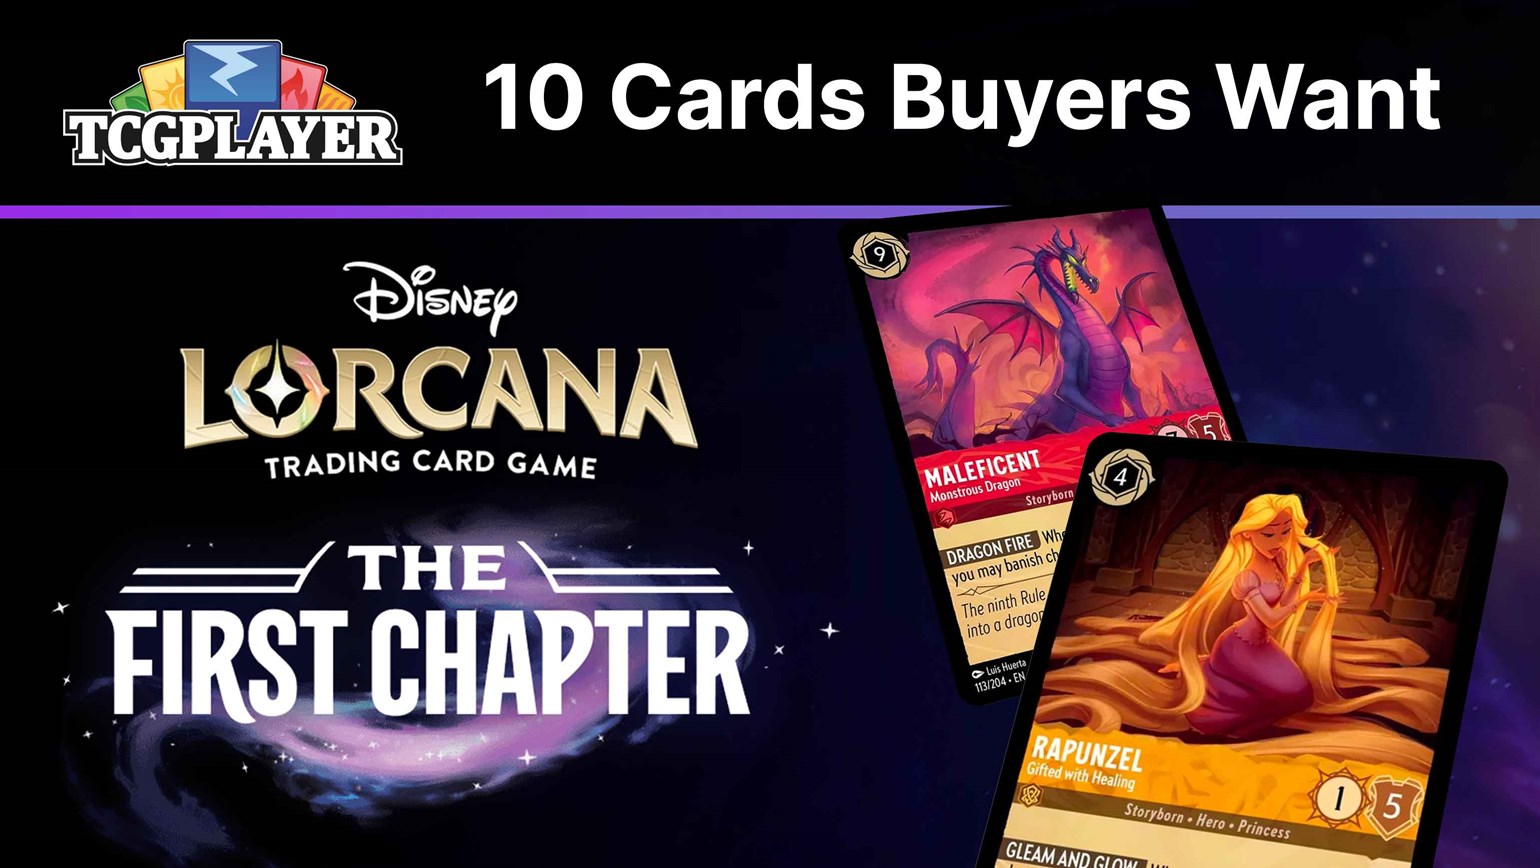 10 Cards Buyers Want From Disney Lorcana: The First Chapter